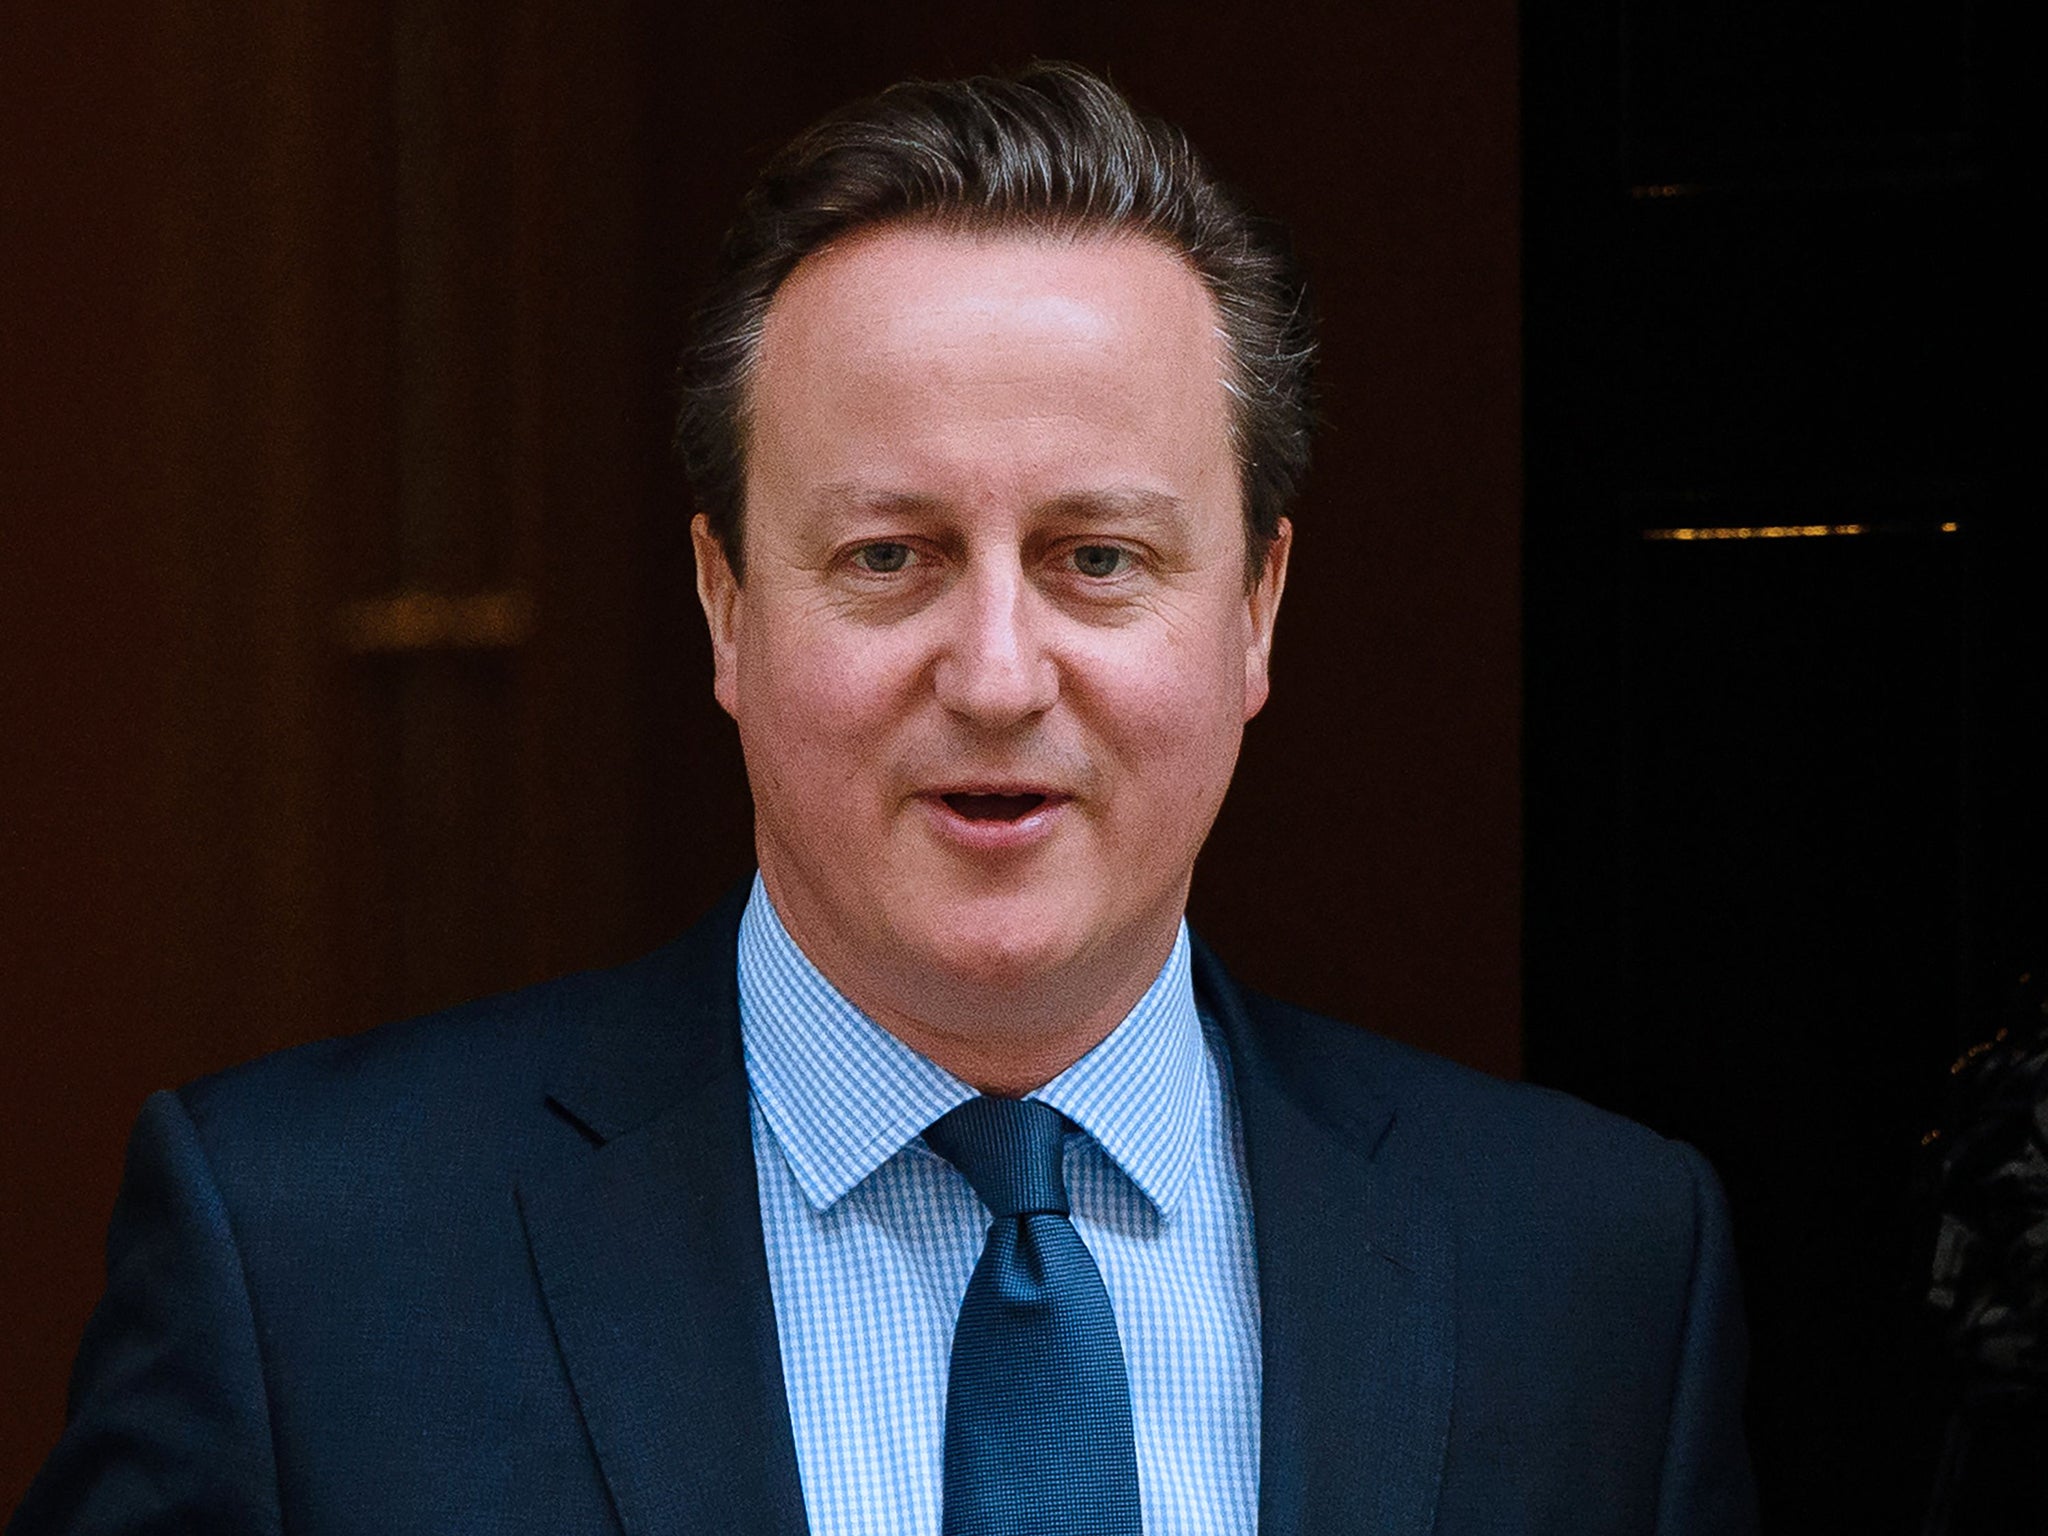 Cameron also admitted for the first time his “fear” Britain could sleepwalk out of the EU